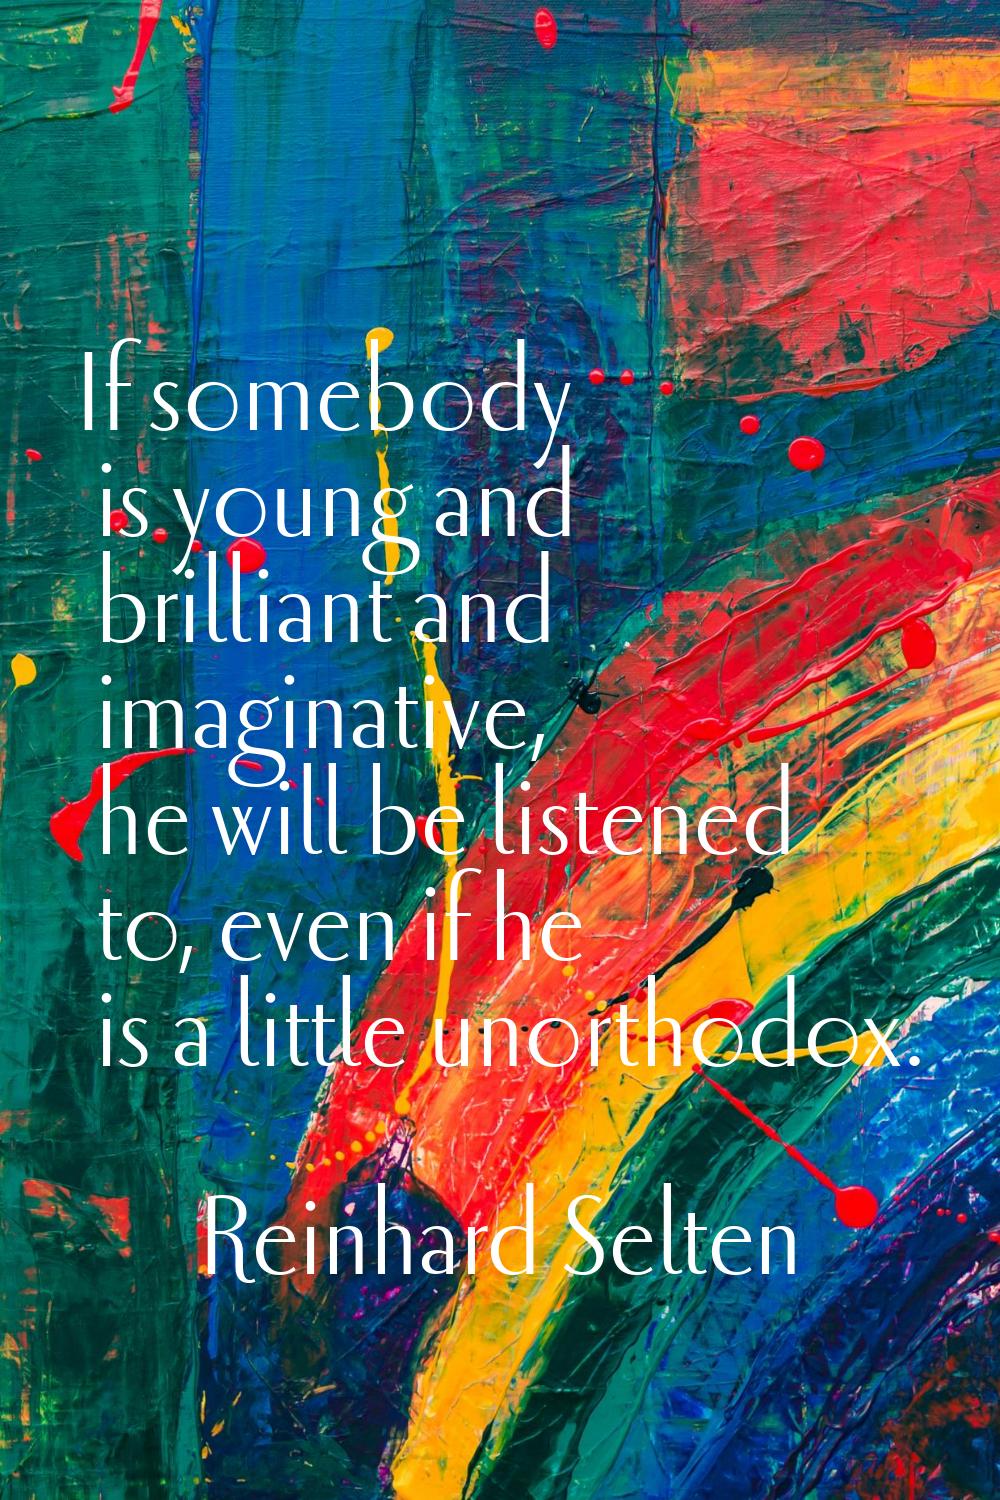 If somebody is young and brilliant and imaginative, he will be listened to, even if he is a little 